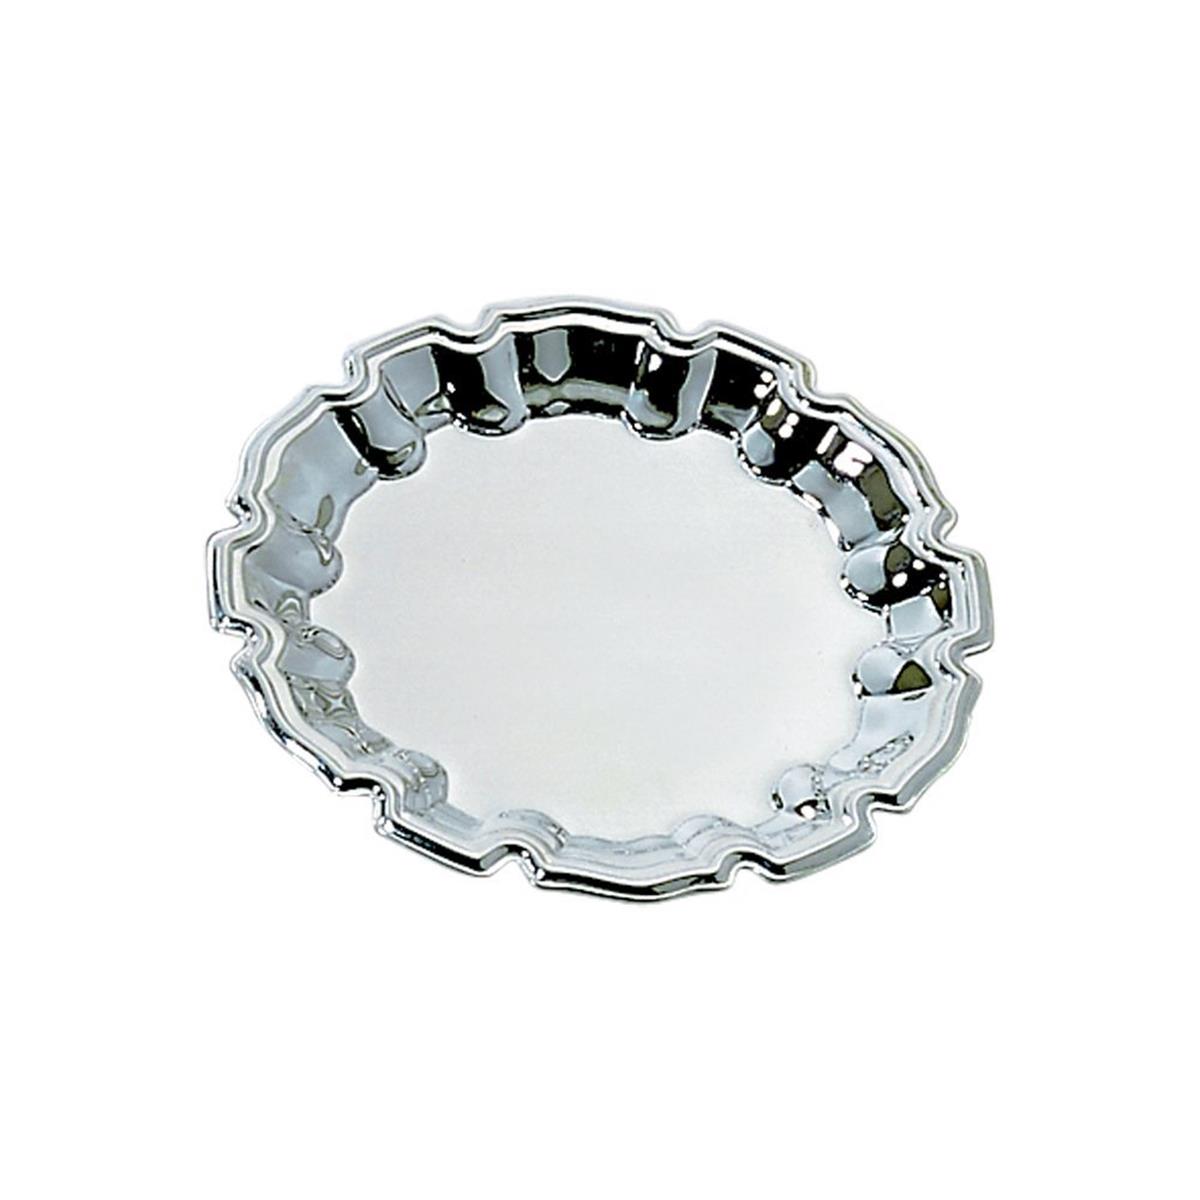 025102 8.5 In. Stainless Steel Chippendale Tray